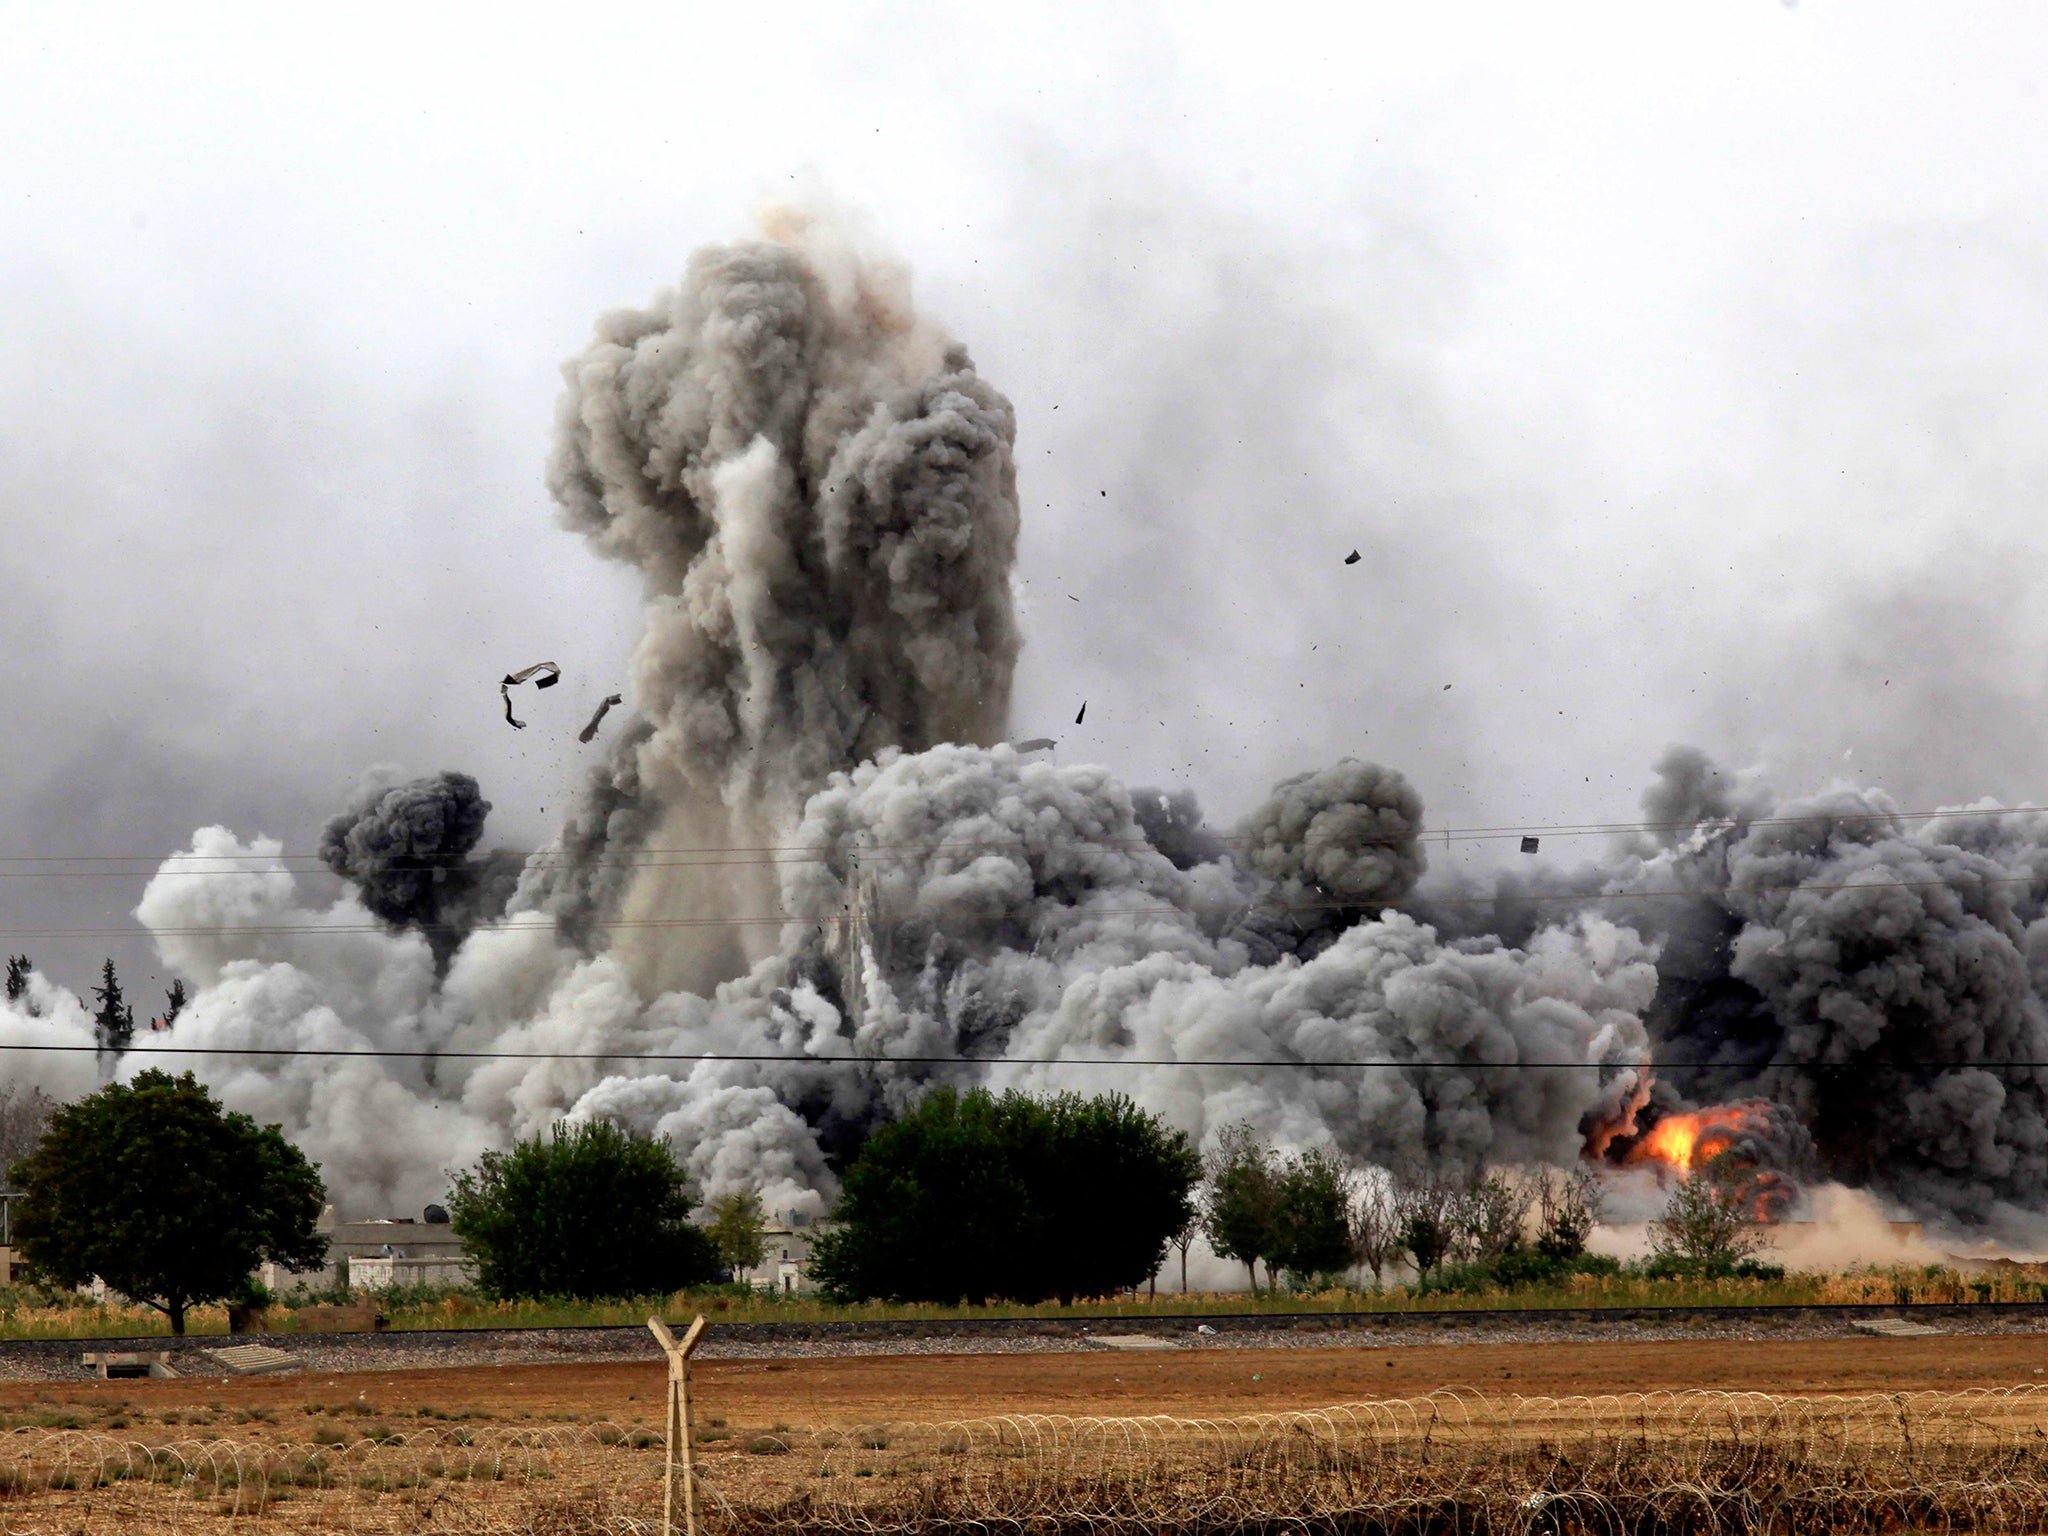 The battle for control of Kobani between Kurds and Isis fighters has raged for a month